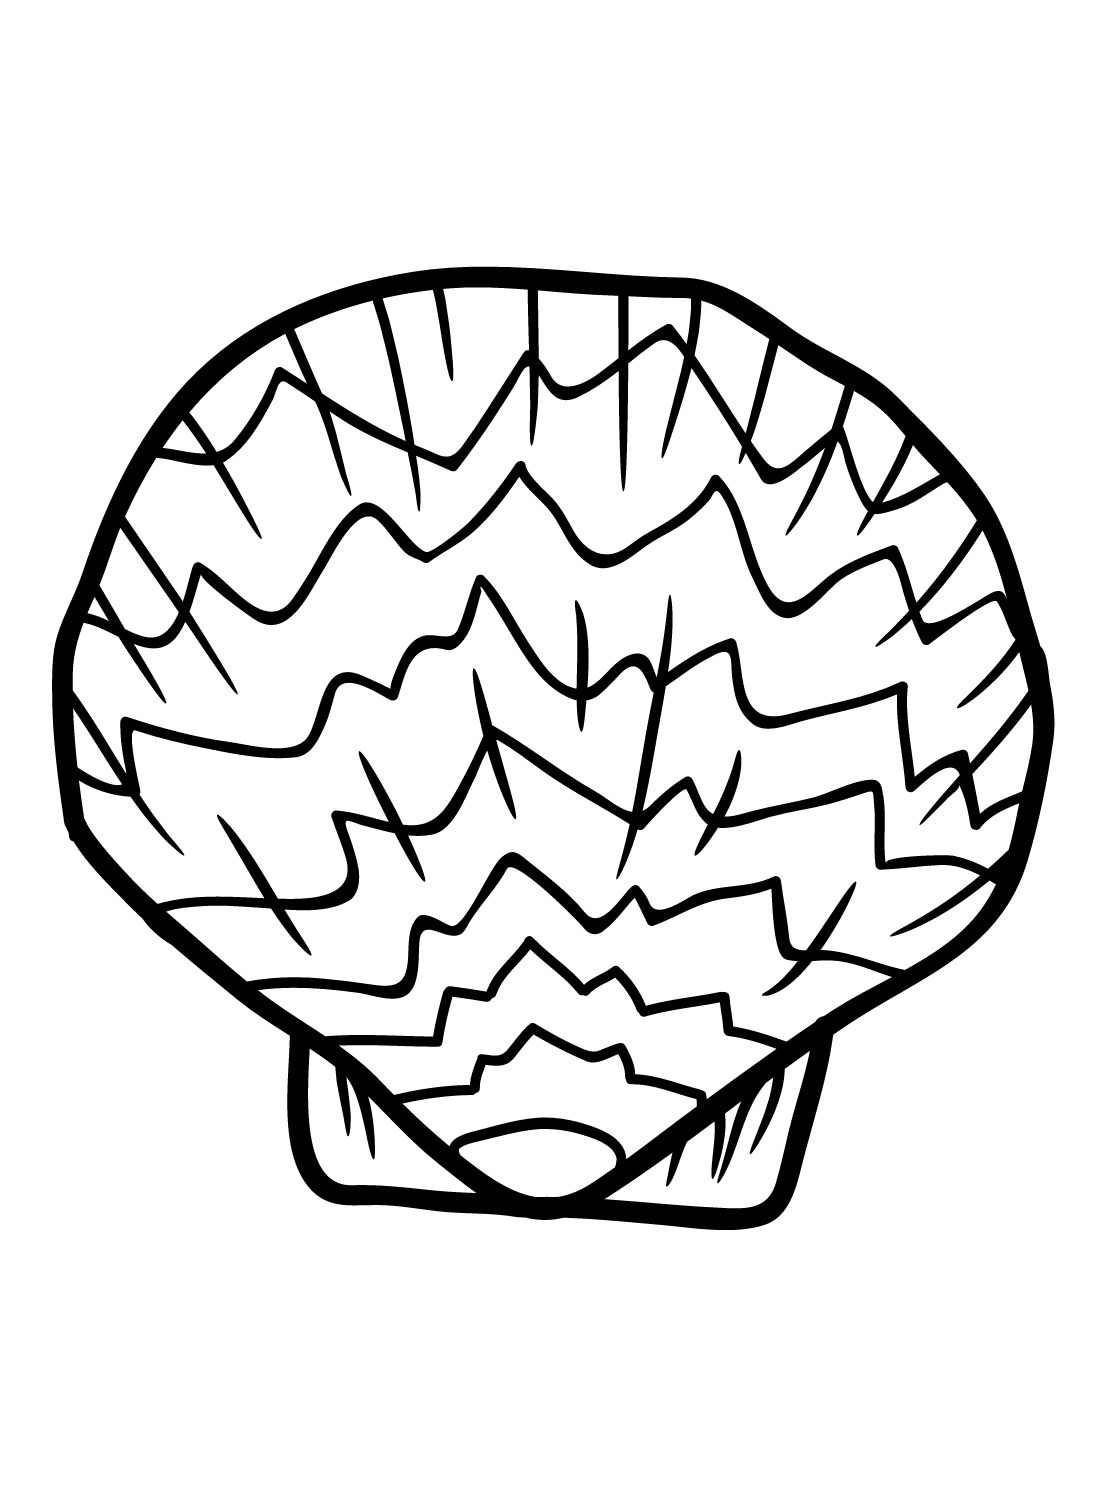 Zigzag Scallop Coloring Page